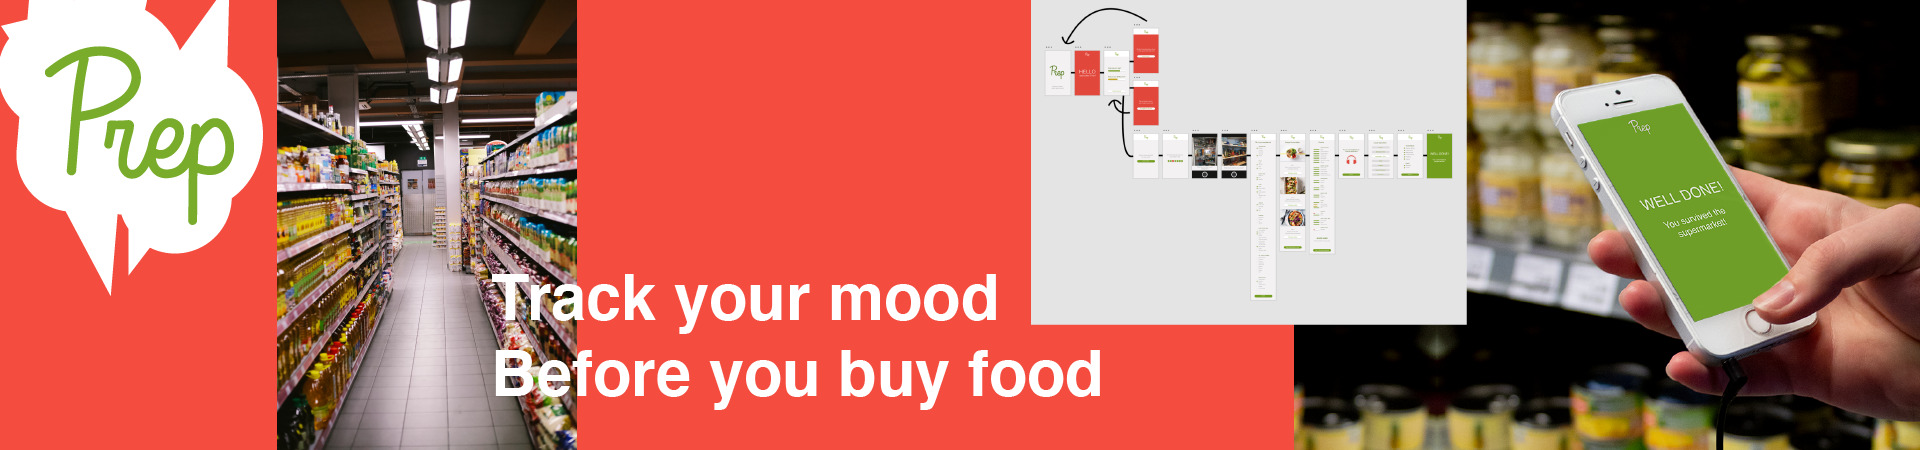 Banner: Prep App - Track your mood before you buy food